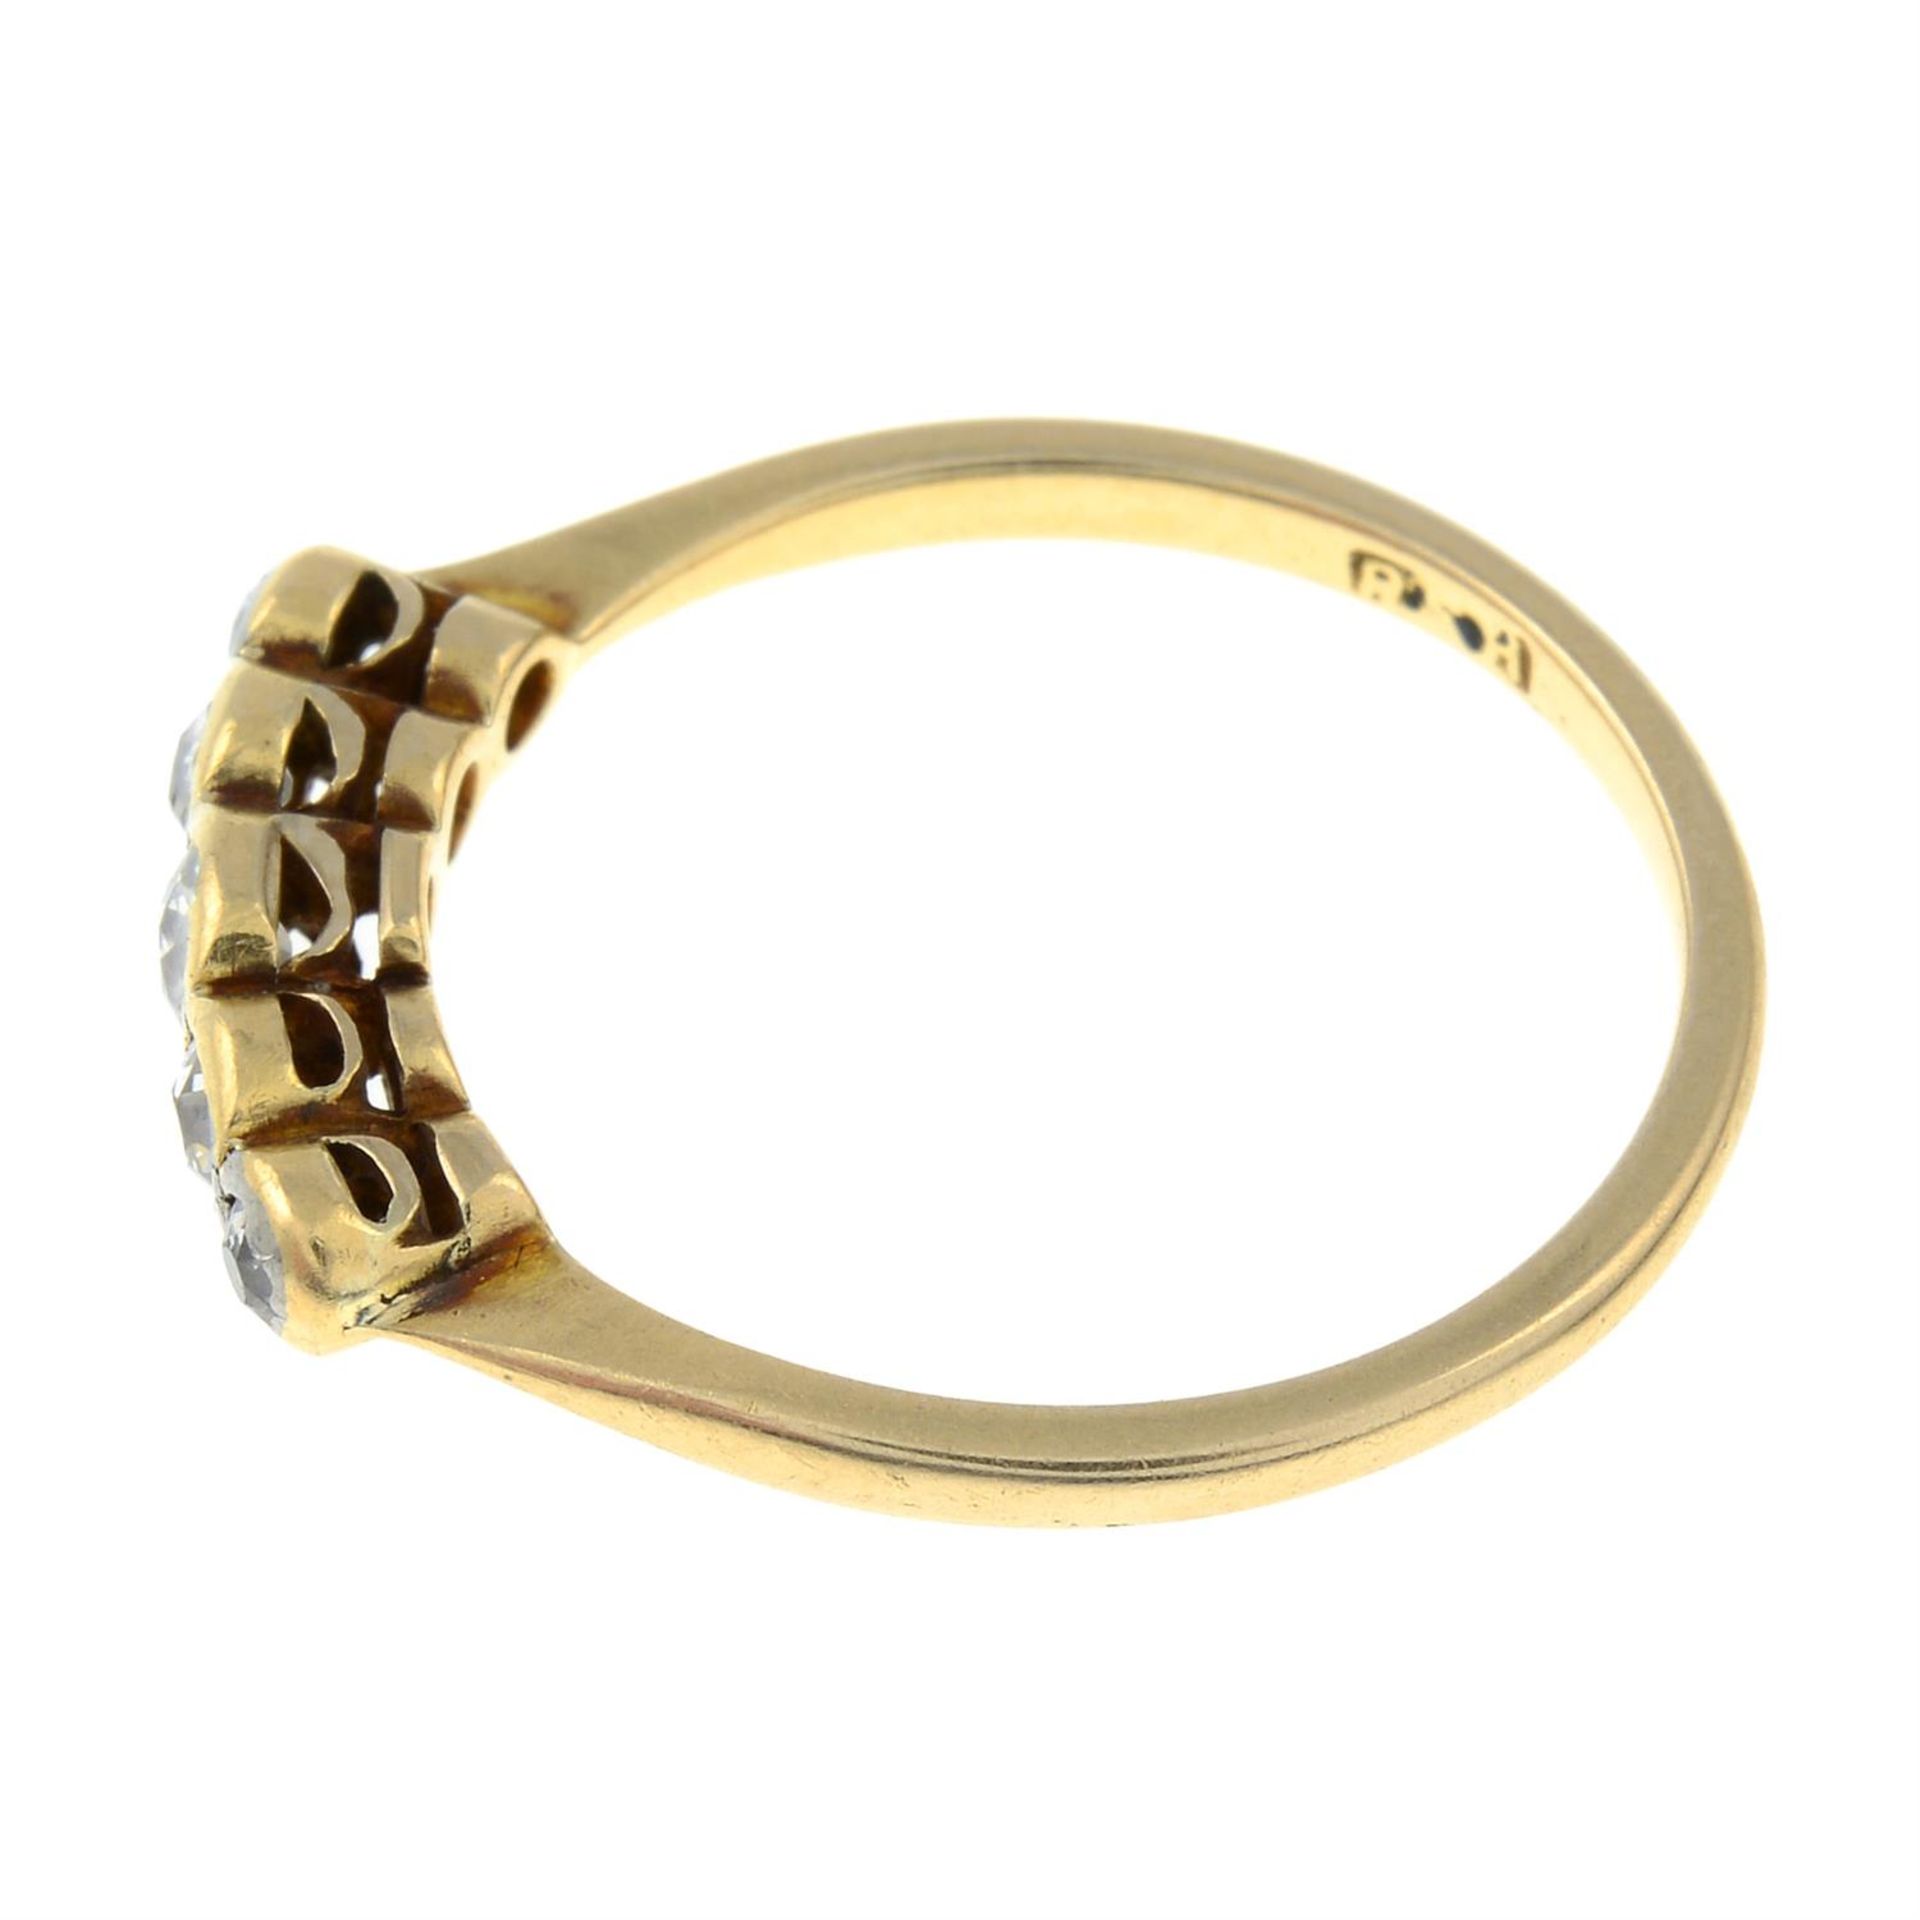 An early 20th century 18ct gold old-cut diamond five stone ring. - Image 2 of 3